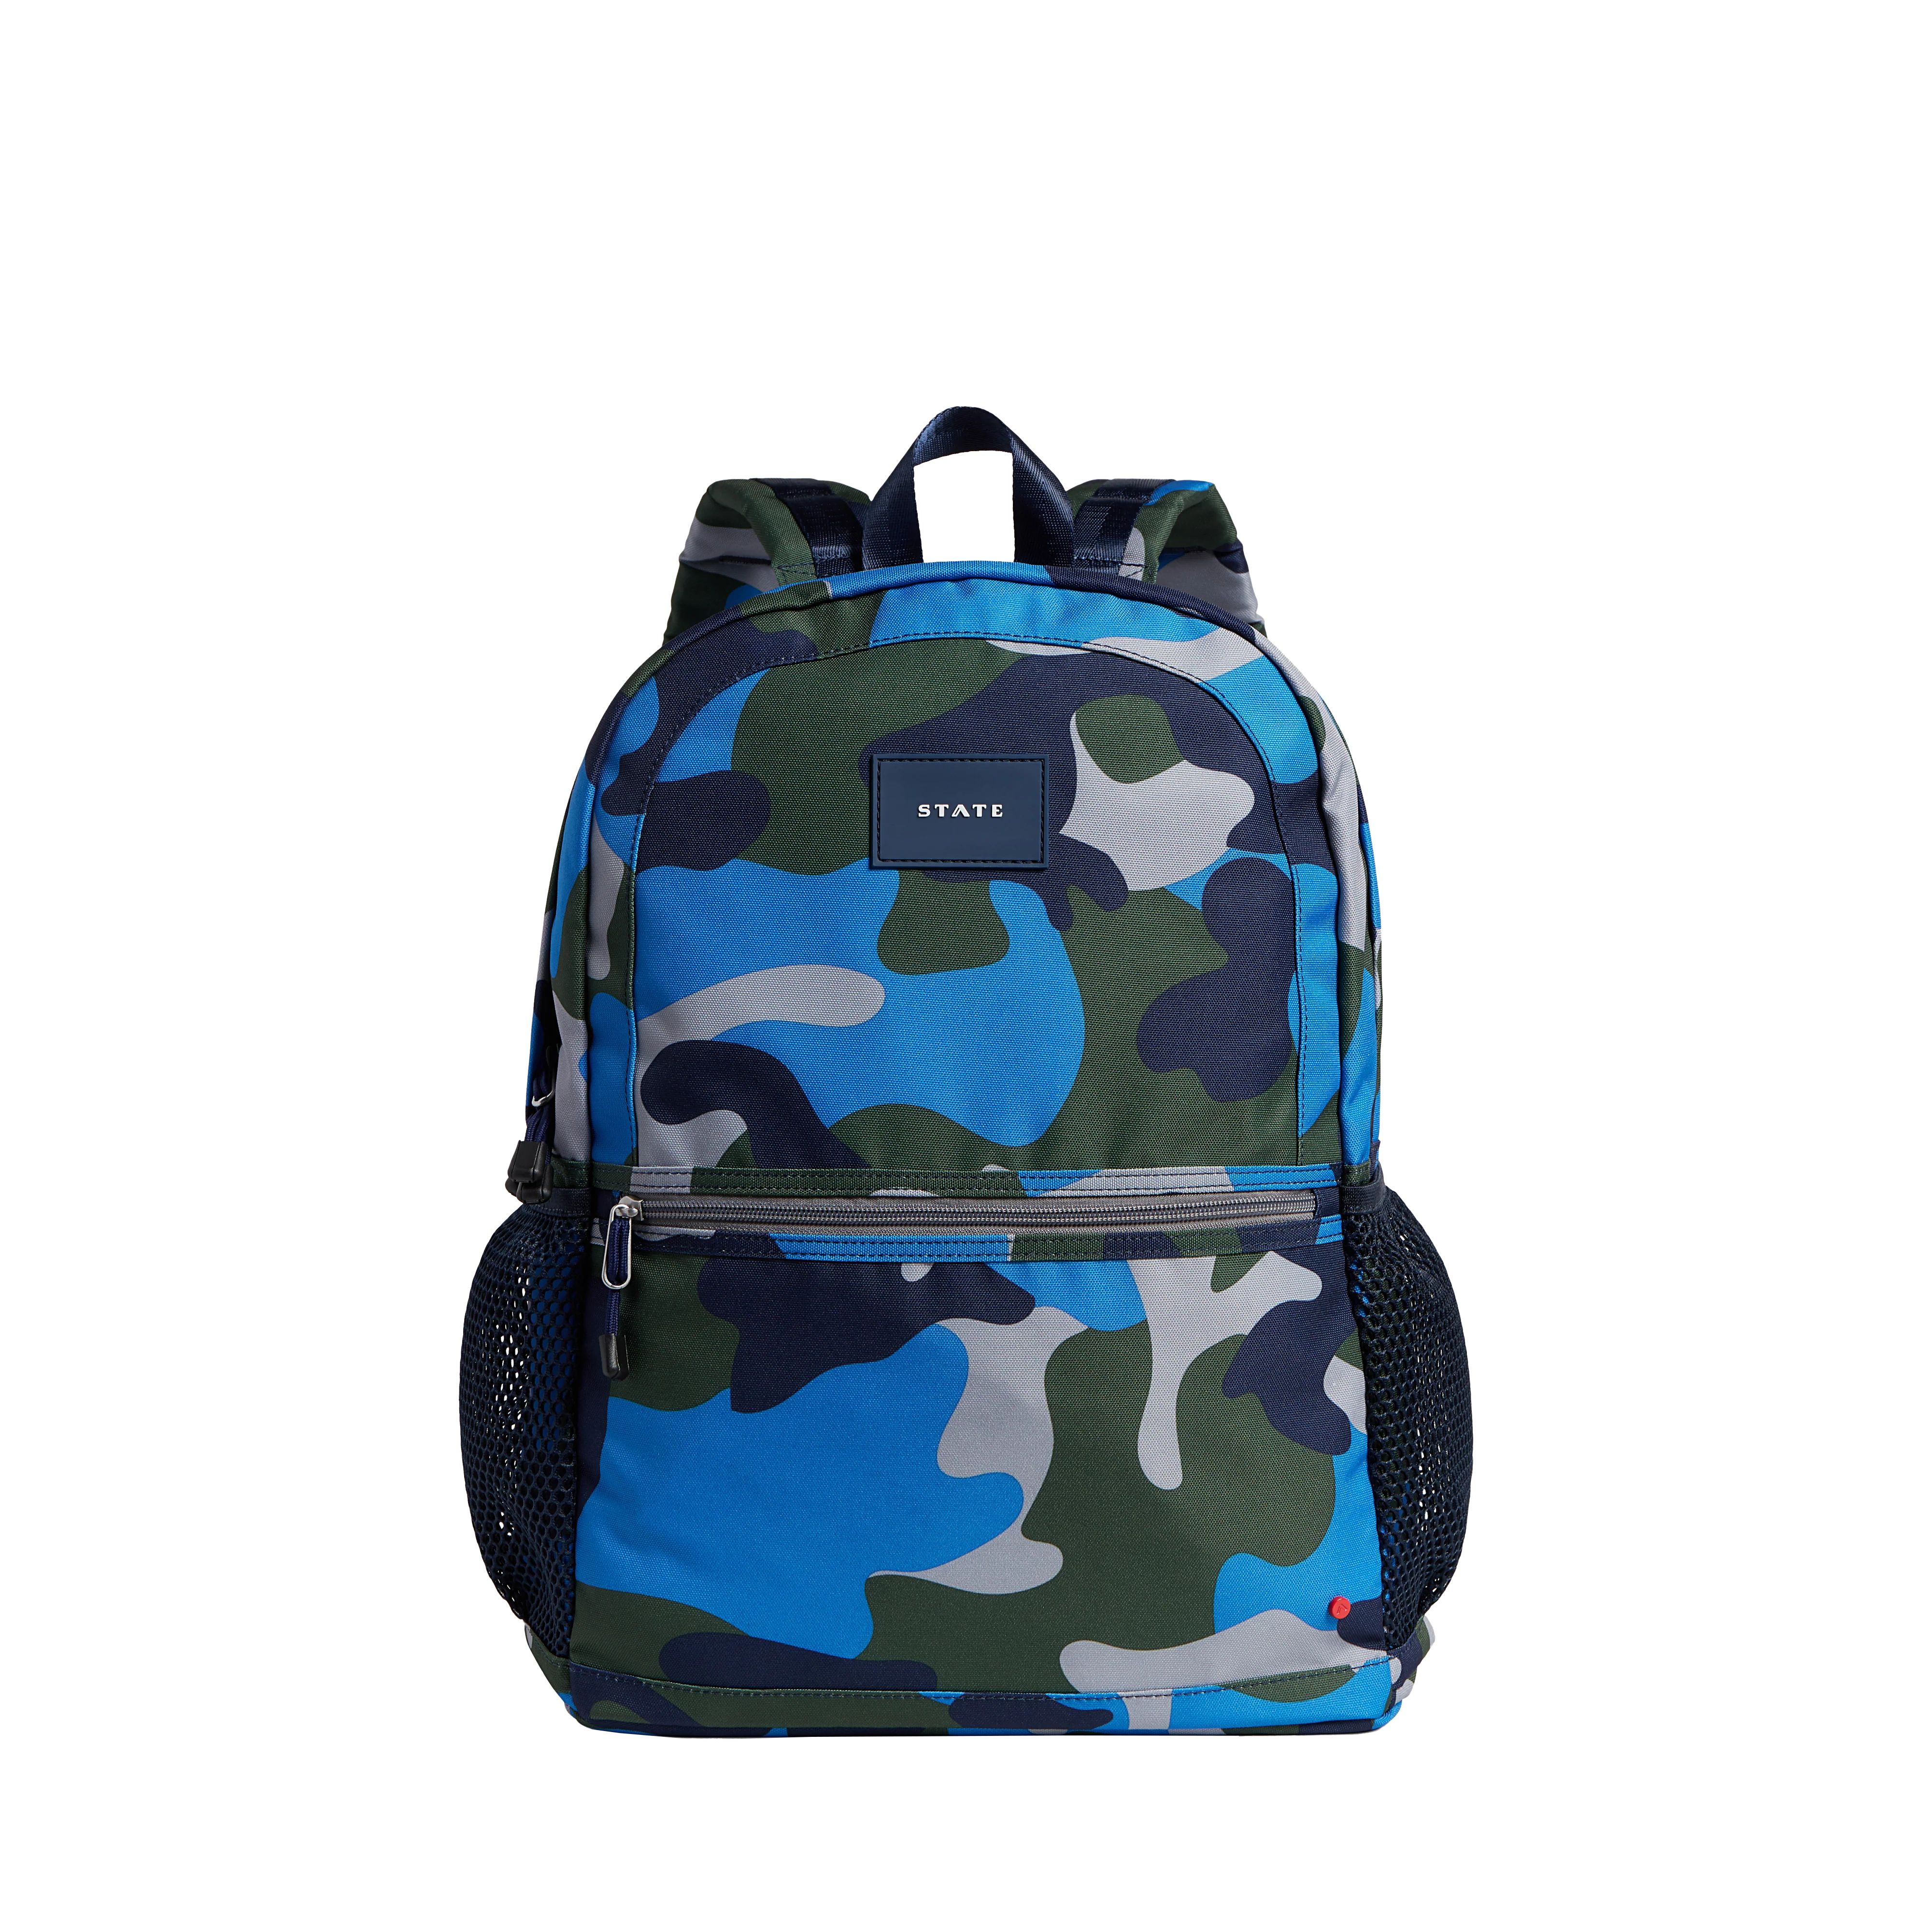 Kane Kids Large Backpack Printed Canvas Camo | STATE Bags